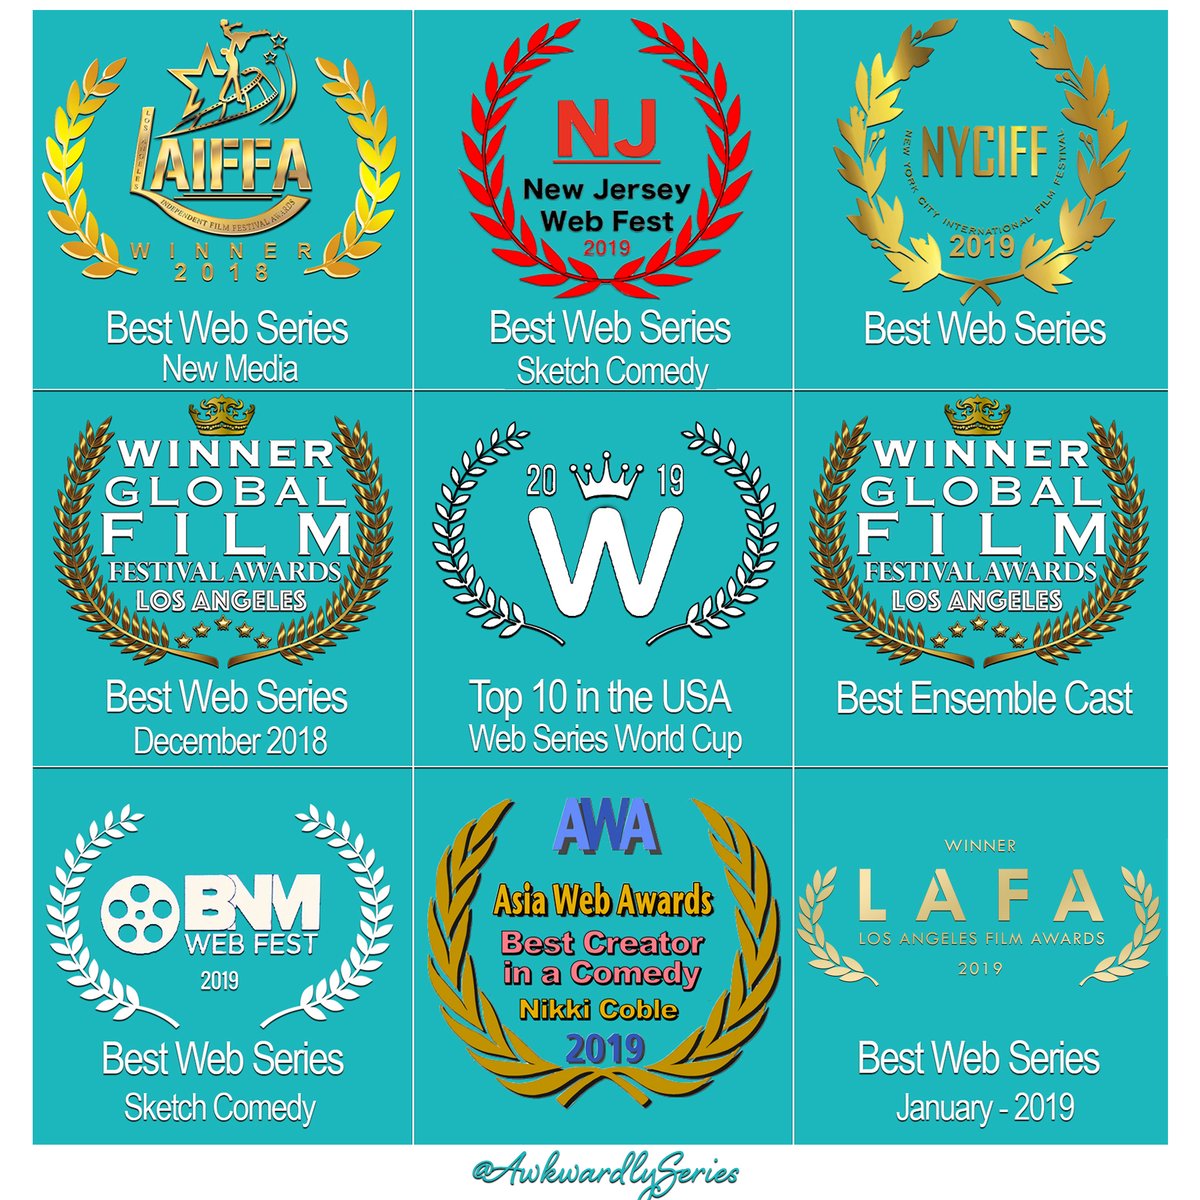 ⭐️A STELLAR YEAR FOR @AwkwardlySeries!⭐️ Congrats on a spectacular year on the int'l festival circuit! Mighty thanks for these fantastic honors & cheers to our new friends around the🌎! @AwardsLaiff @NJWebFest @NYCIFF @GFFAwards #WSWC @baltowebfest @asiawebawards @lafilmawards